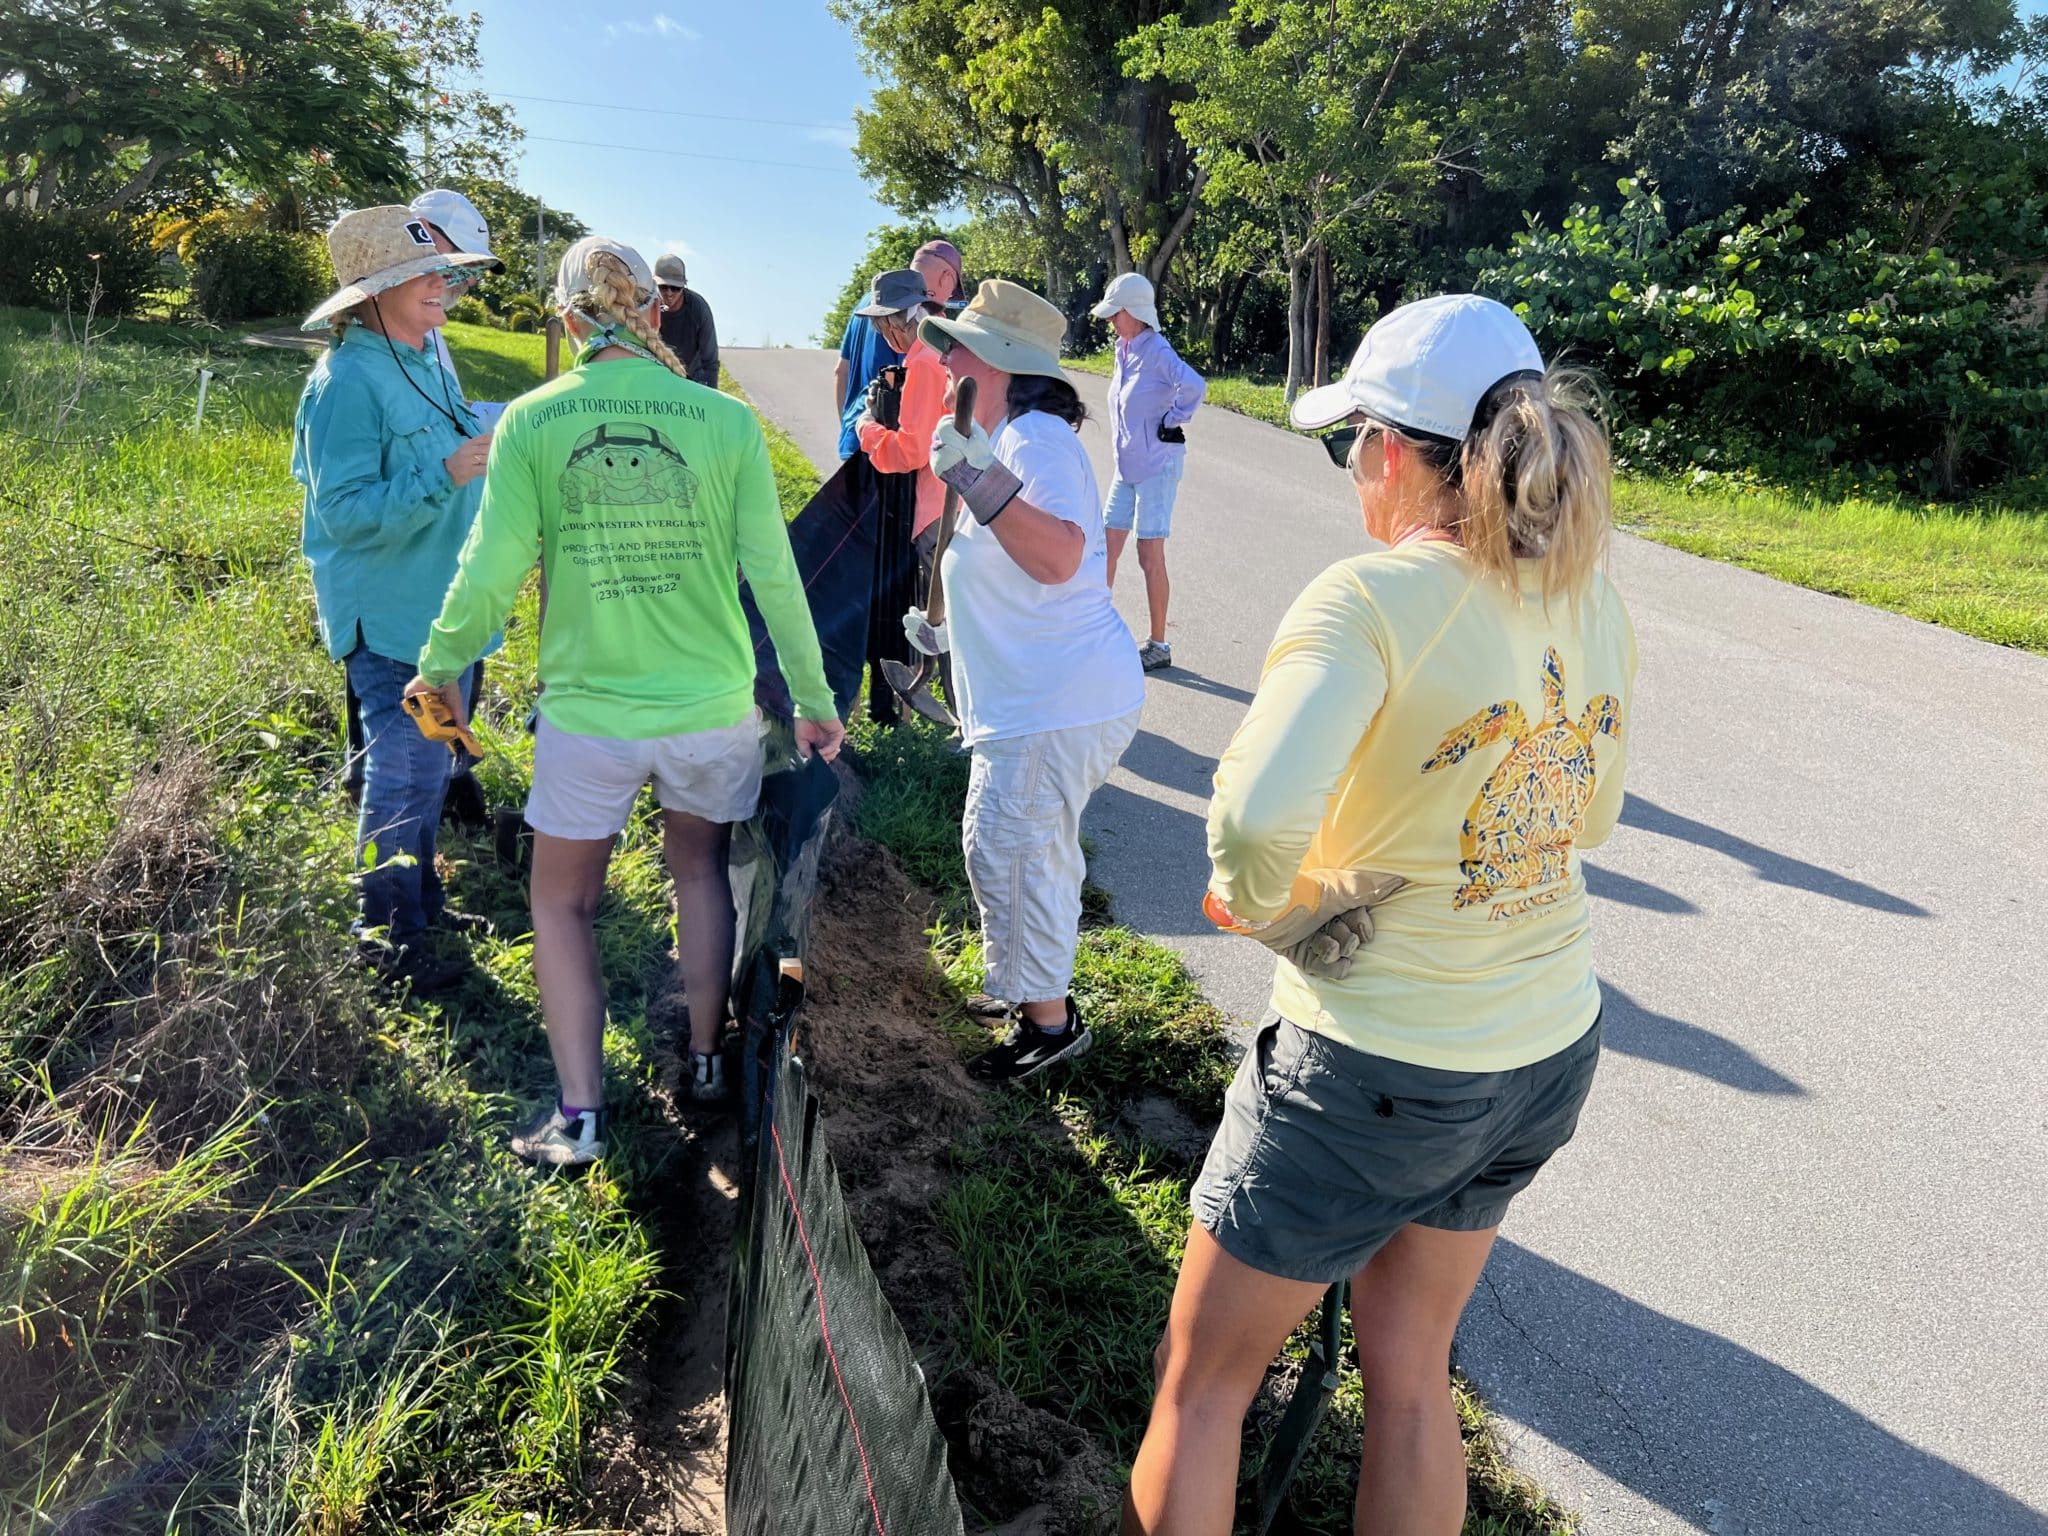 The volunteers work together to dig, place and fill a protective silt fence along the corner of Hawaii Drive and South Barfield Drive in Marco Island as a solution for preventing Gopher tortoise injuries.